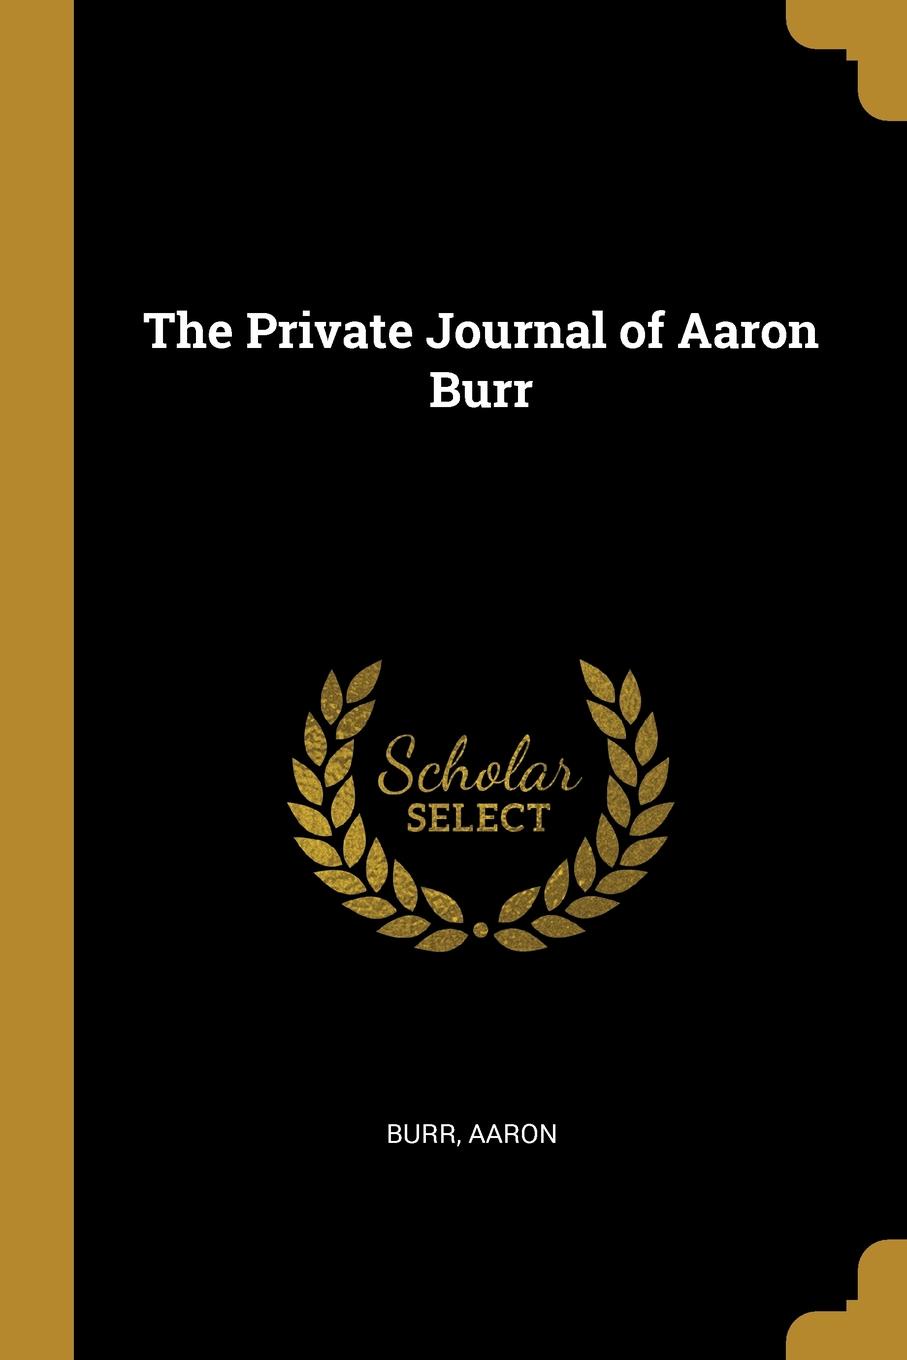 The Private Journal of Aaron Burr